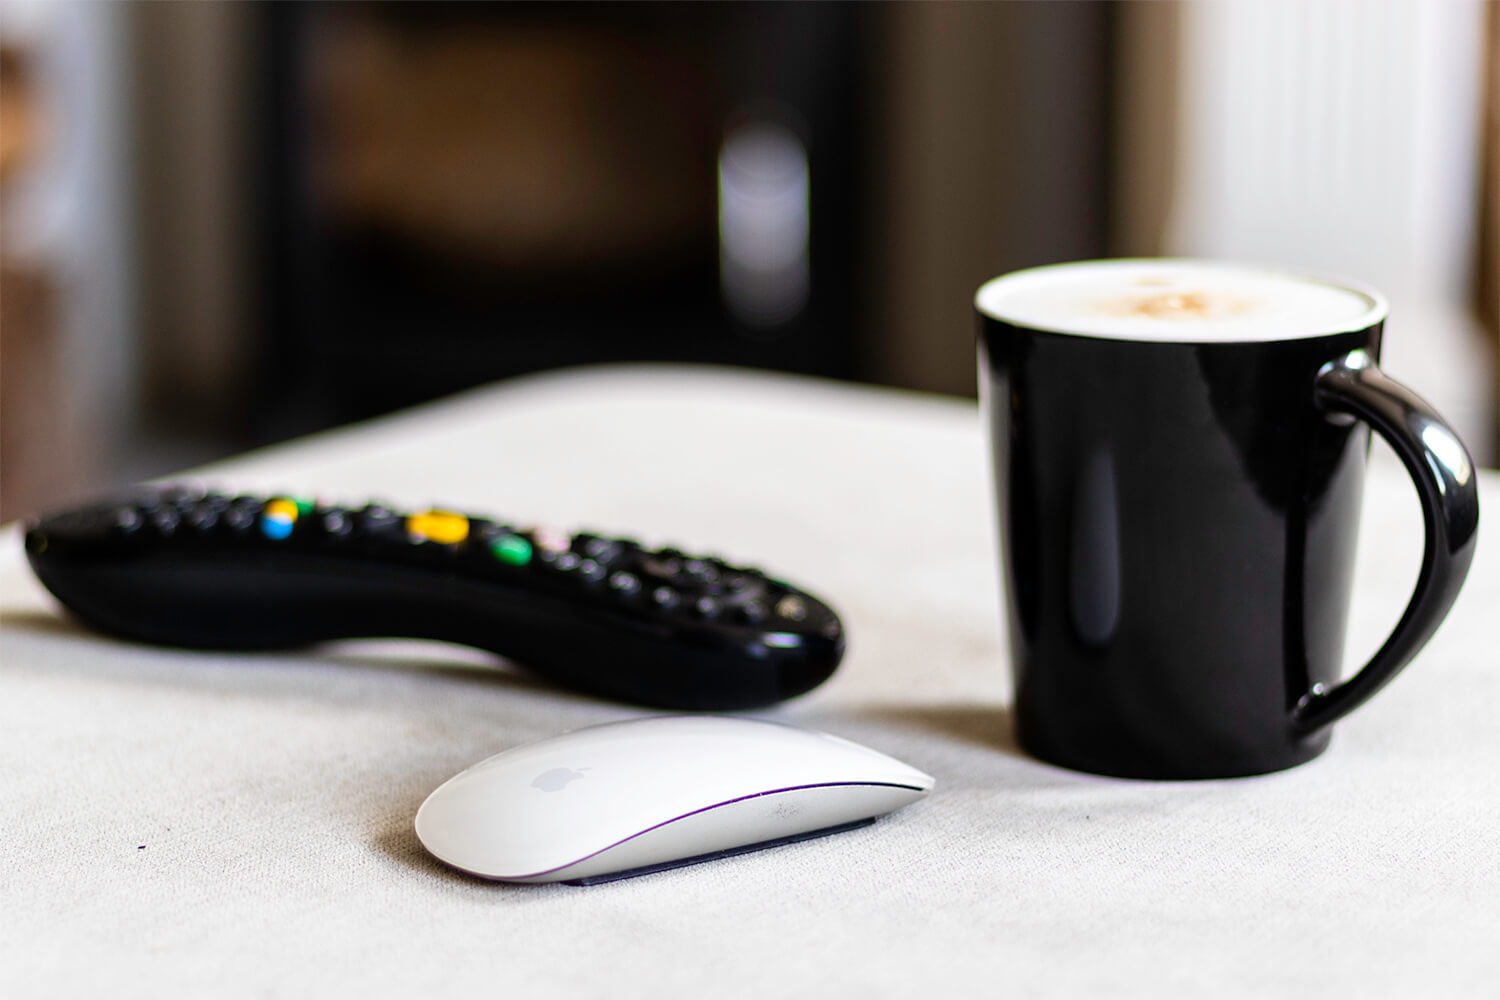 A magic mouse, cappucino and TV remote on a foot stool